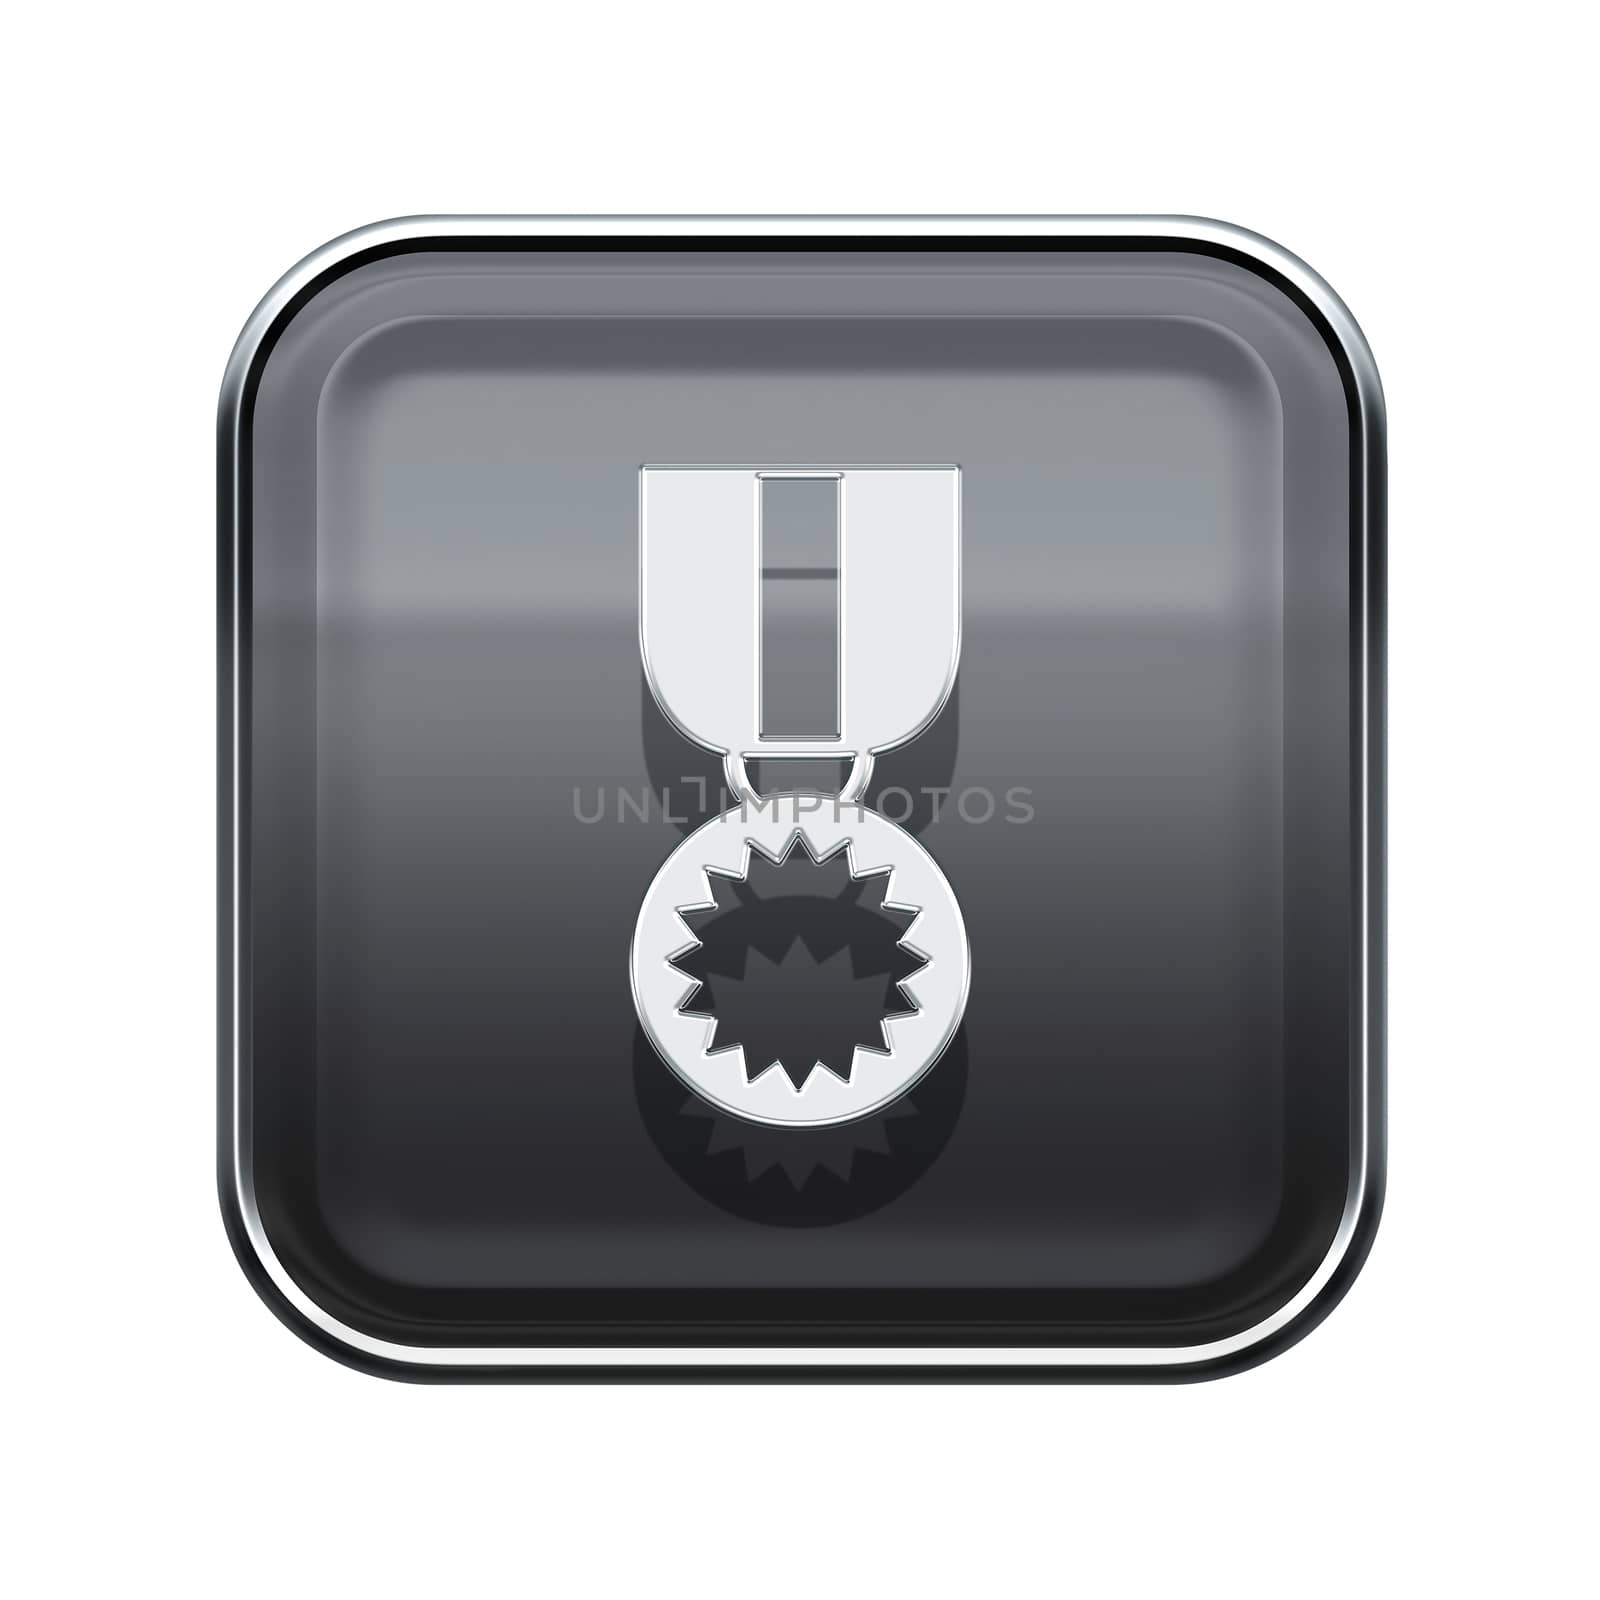 medal icon glossy grey, isolated on white background.